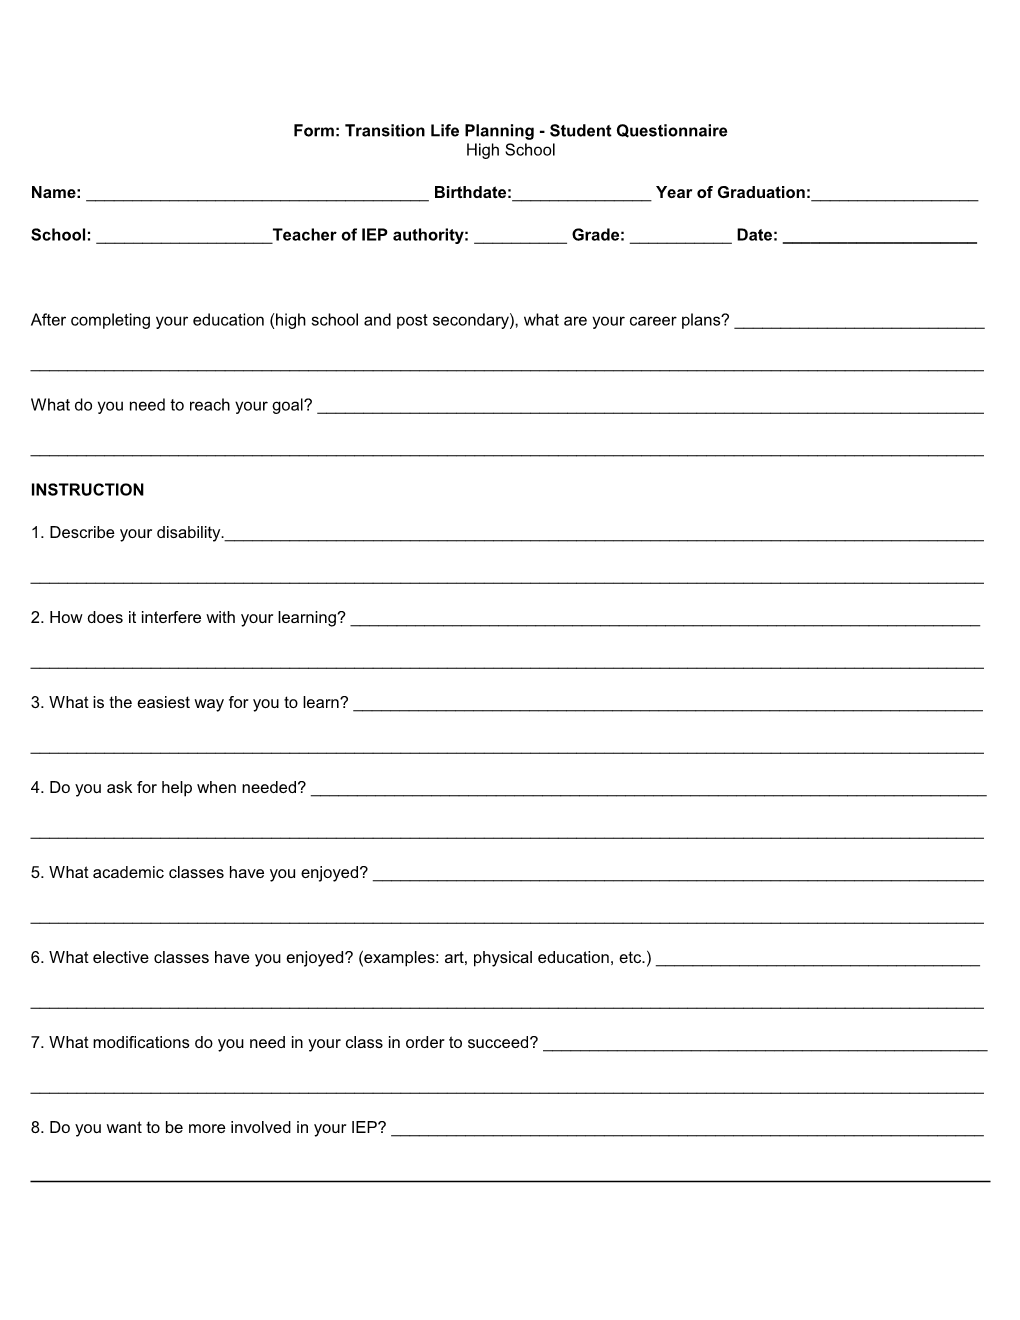 Form: Transition Life Planning - Student Questionnaire